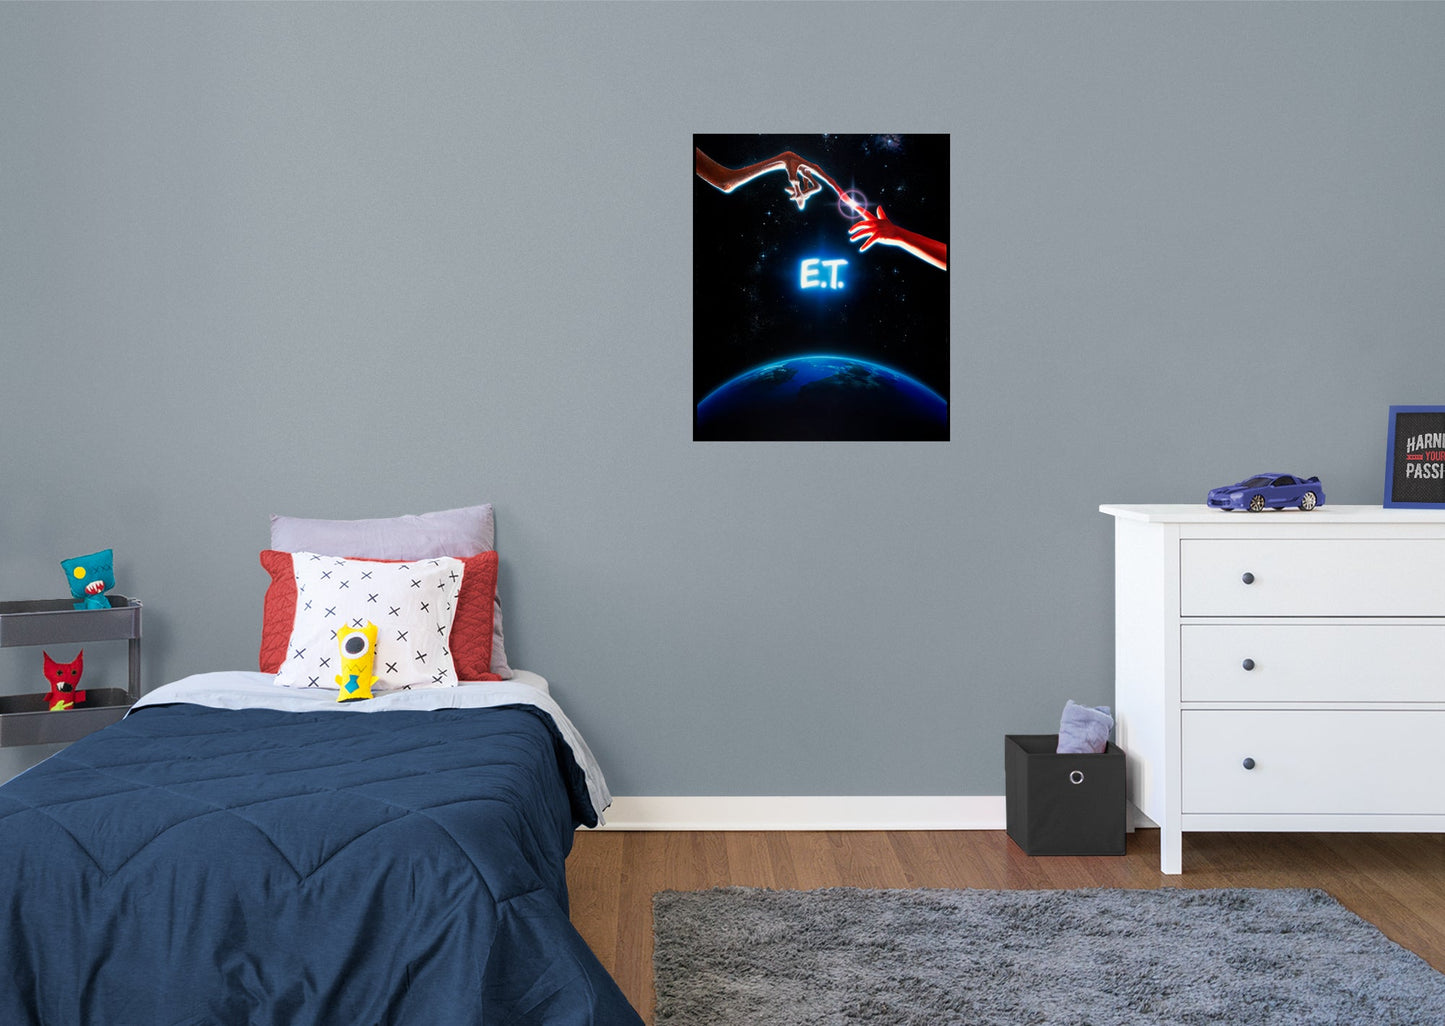 E.T.:  Hands Movie Poster Mural        - Officially Licensed NBC Universal Removable Wall   Adhesive Decal